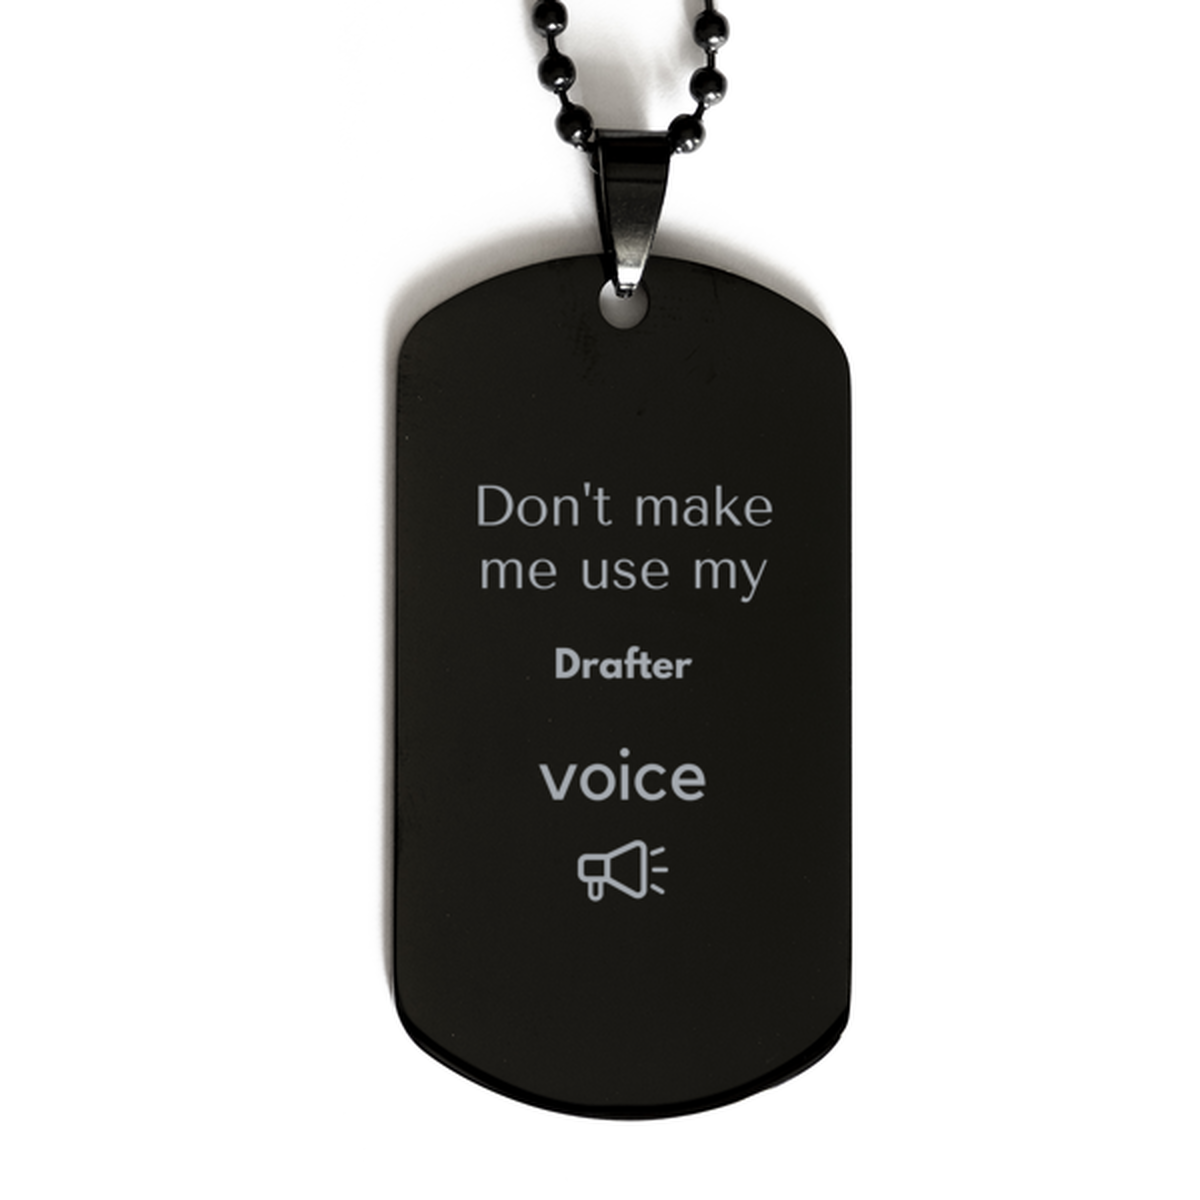 Don't make me use my Drafter voice, Sarcasm Drafter Gifts, Christmas Drafter Black Dog Tag Birthday Unique Gifts For Drafter Coworkers, Men, Women, Colleague, Friends